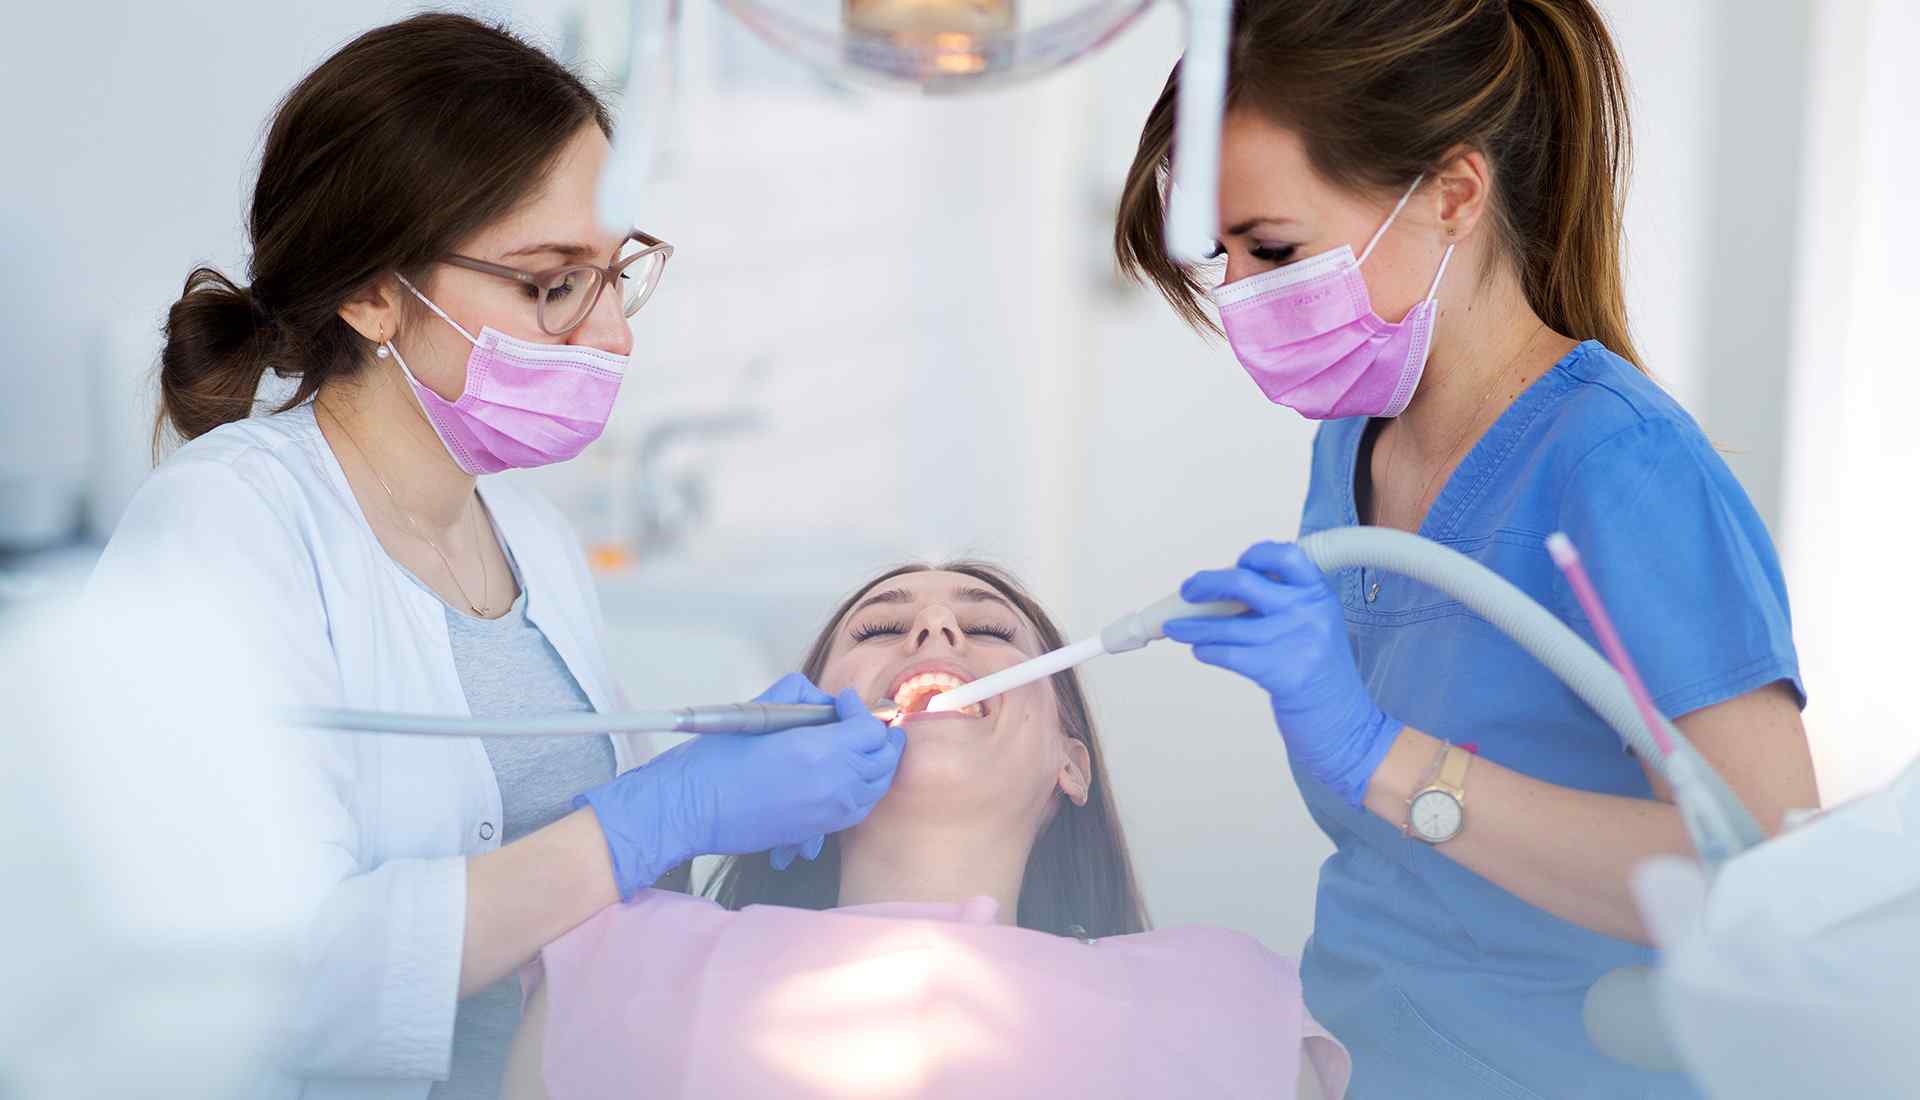 https://cbardentistry.com/wp-content/uploads/2020/01/featured_image_shop.jpg